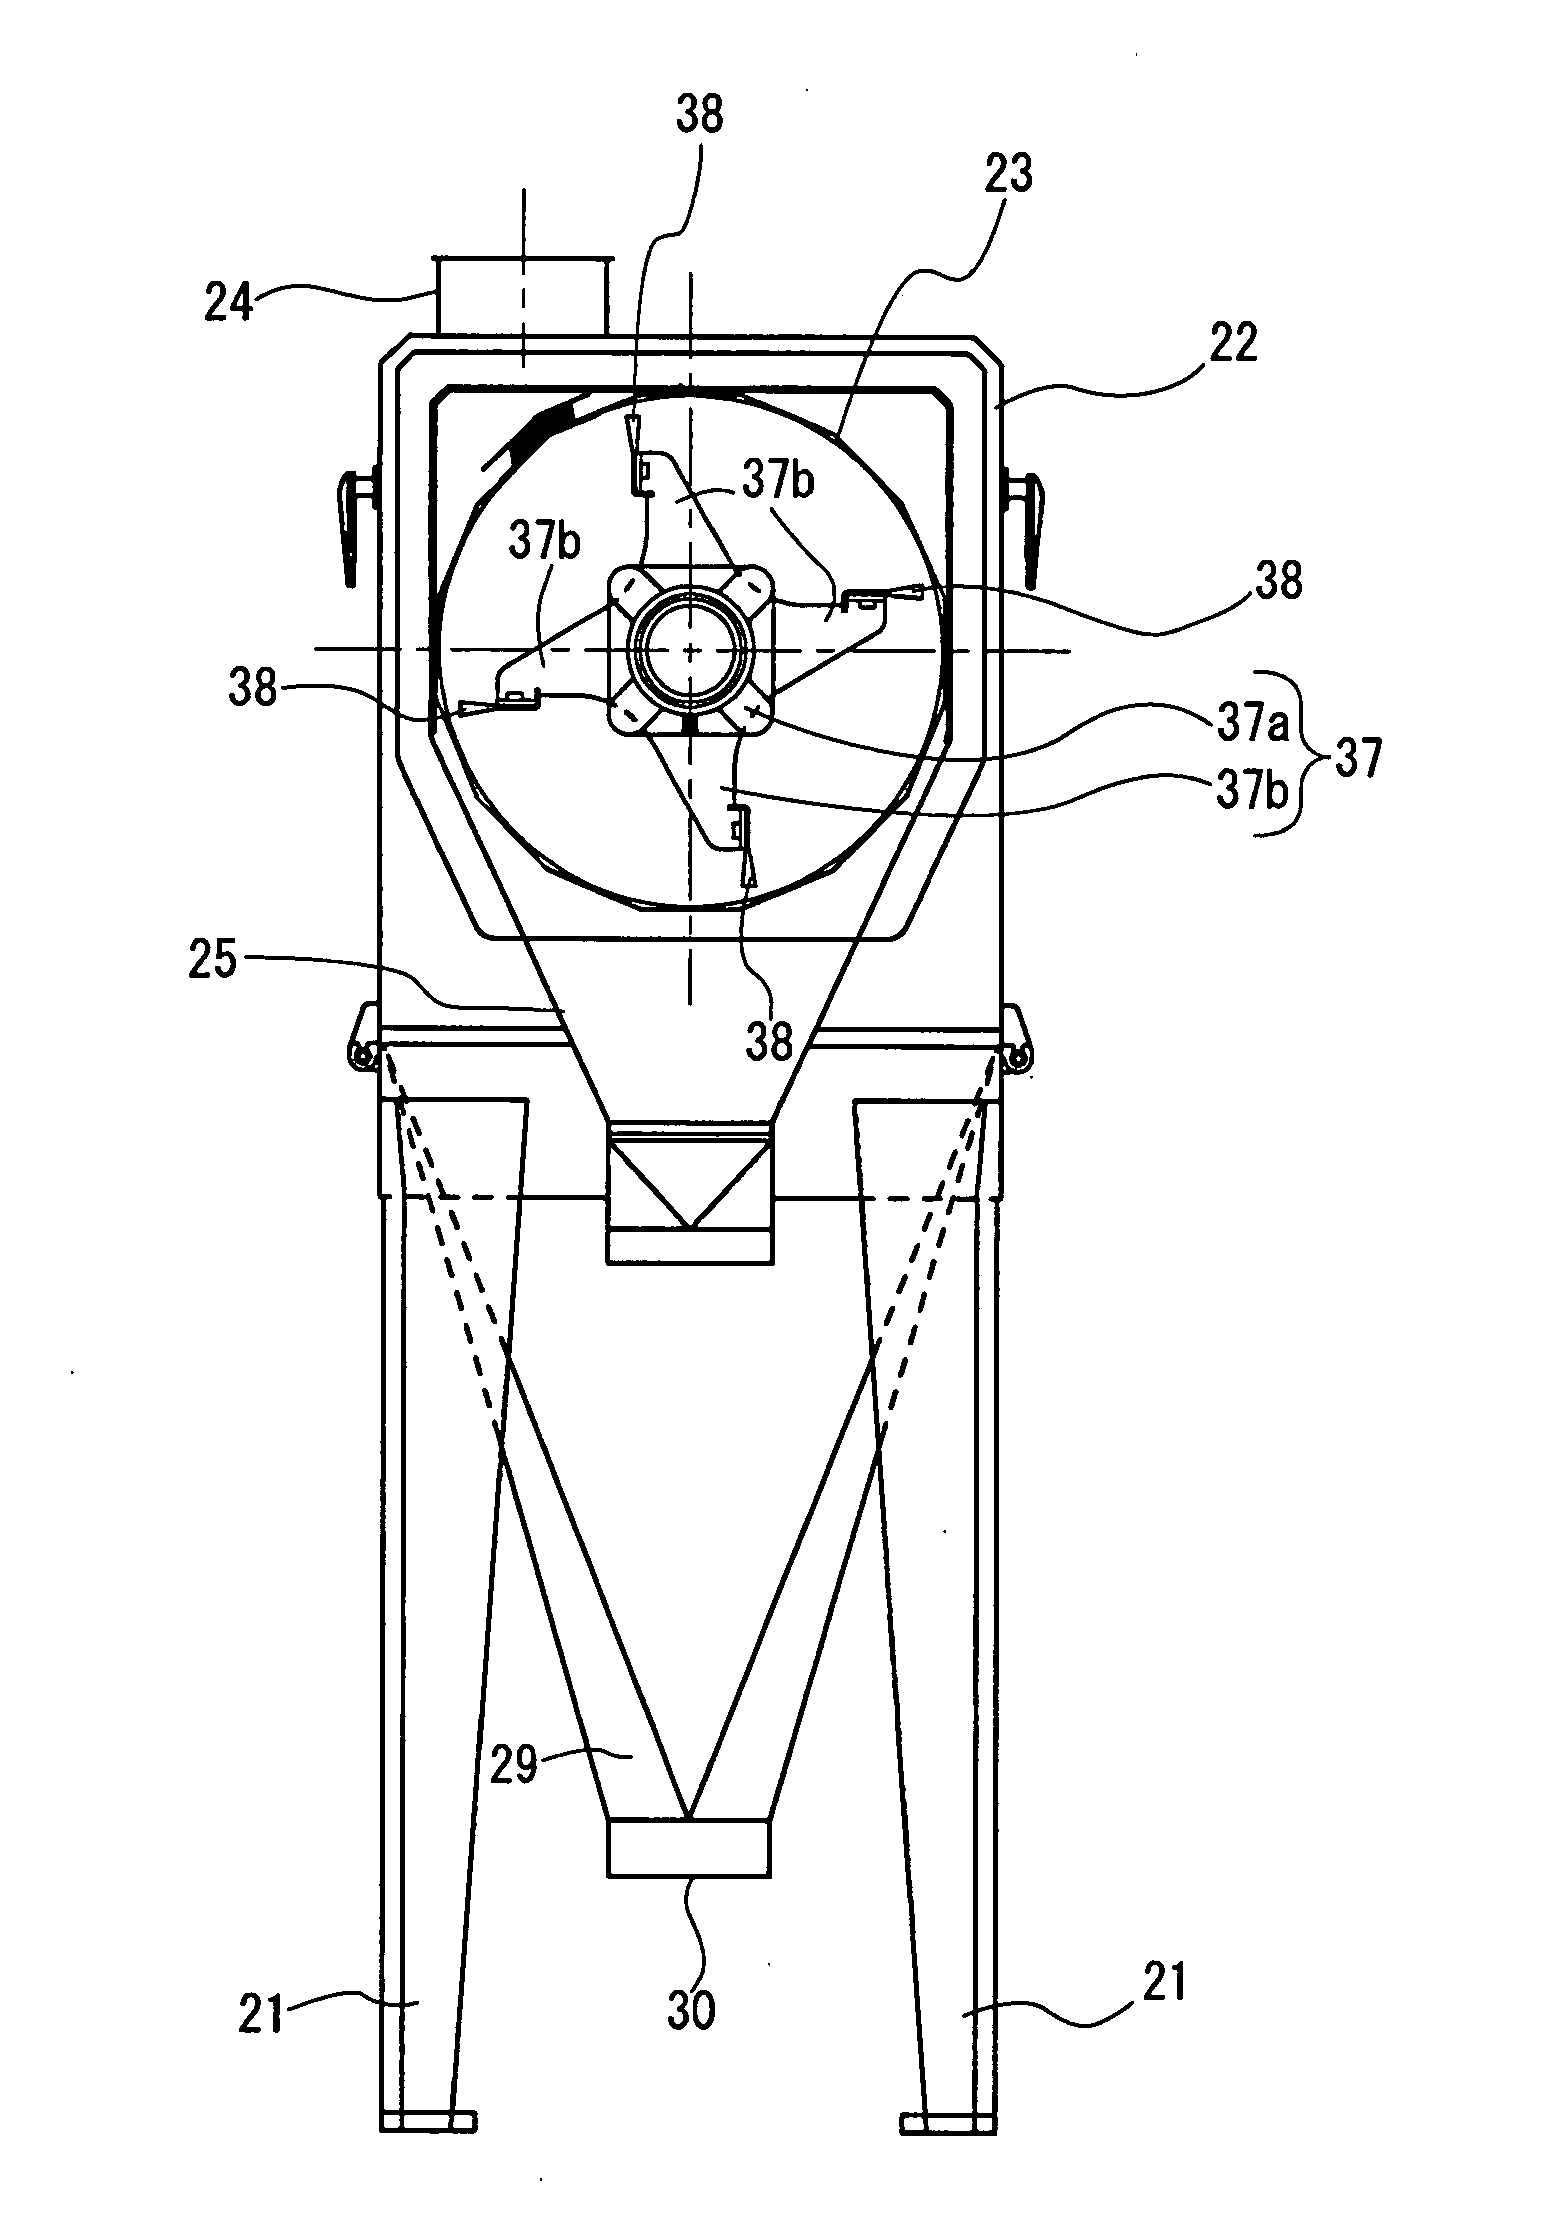 Method of and apparatus for processing corn grains for production of ethanol